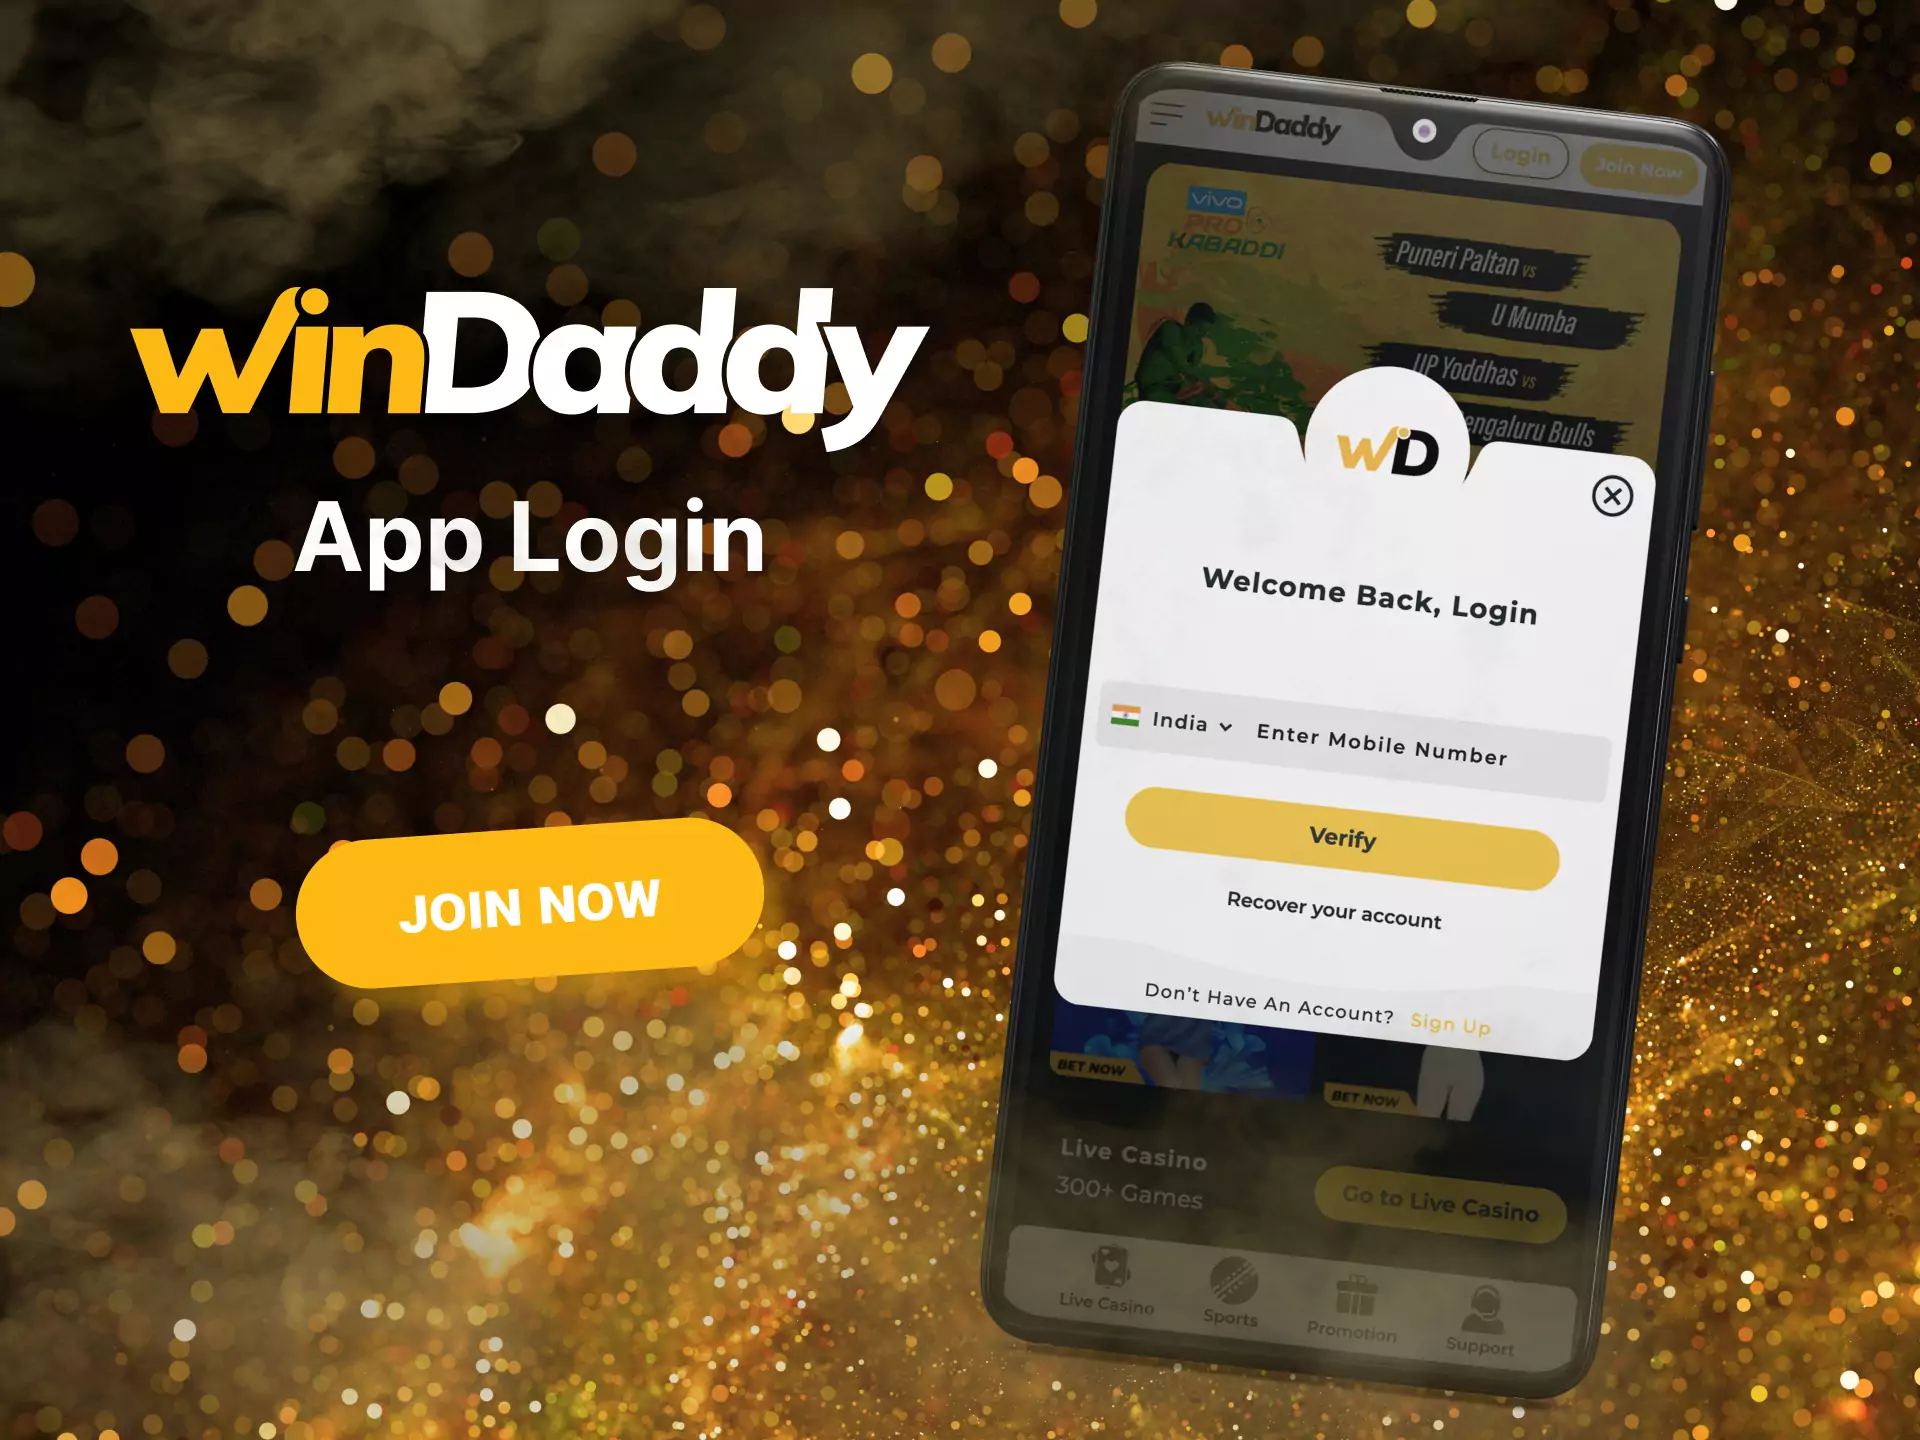 Logging into Windaddy is simple and convenient.